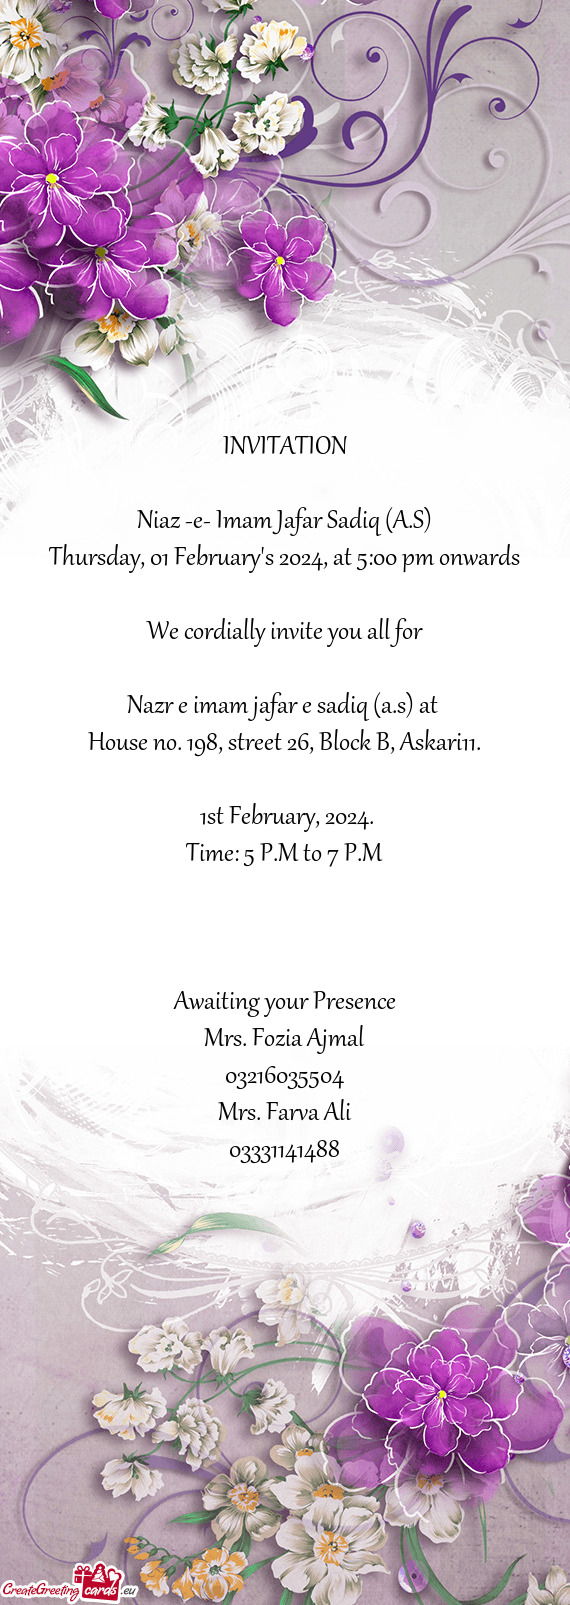 Thursday, 01 February's 2024, at 5:00 pm onwards